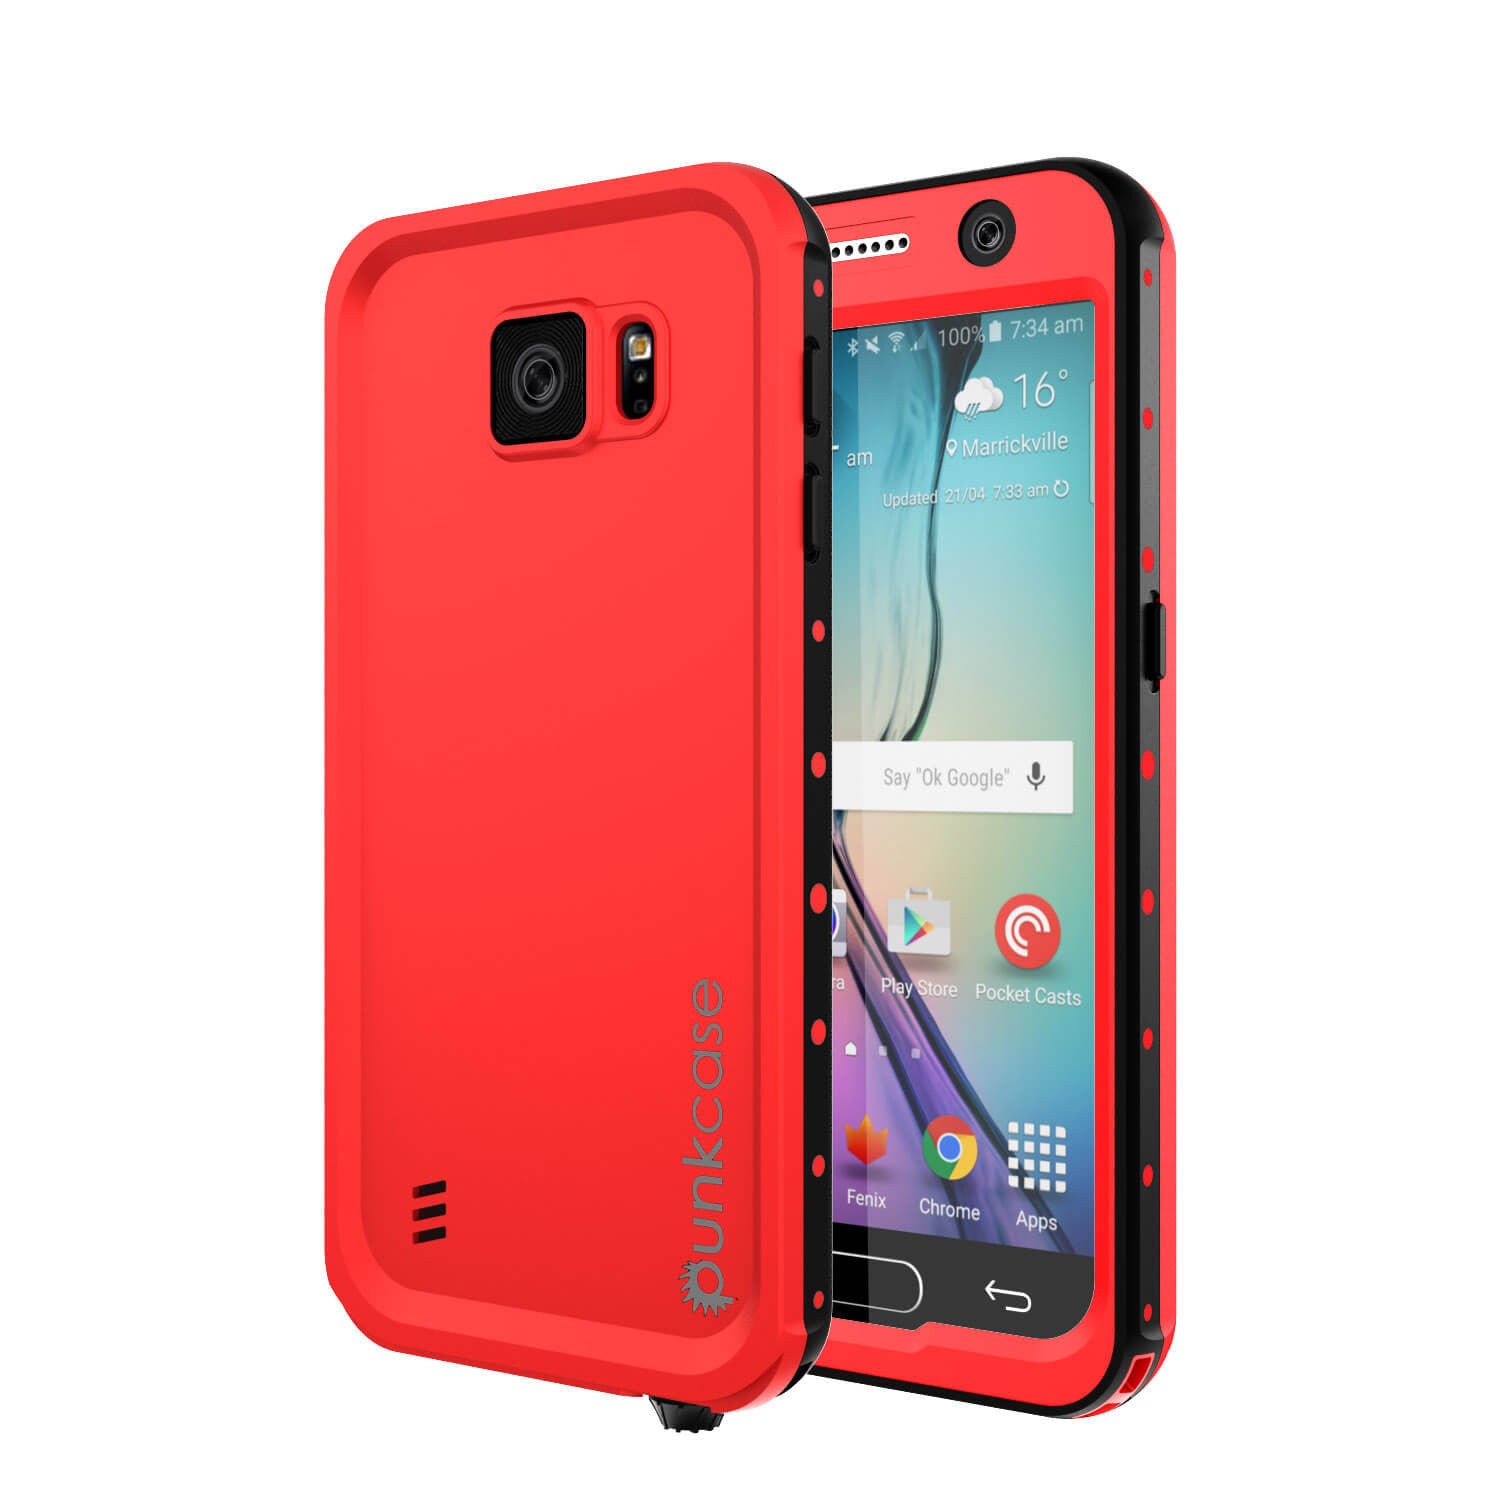 Galaxy S6 Waterproof Case PunkCase StudStar Red Thin 6.6ft Underwater IP68 Shock/Dirt/Snow Proof (Color in image: red)